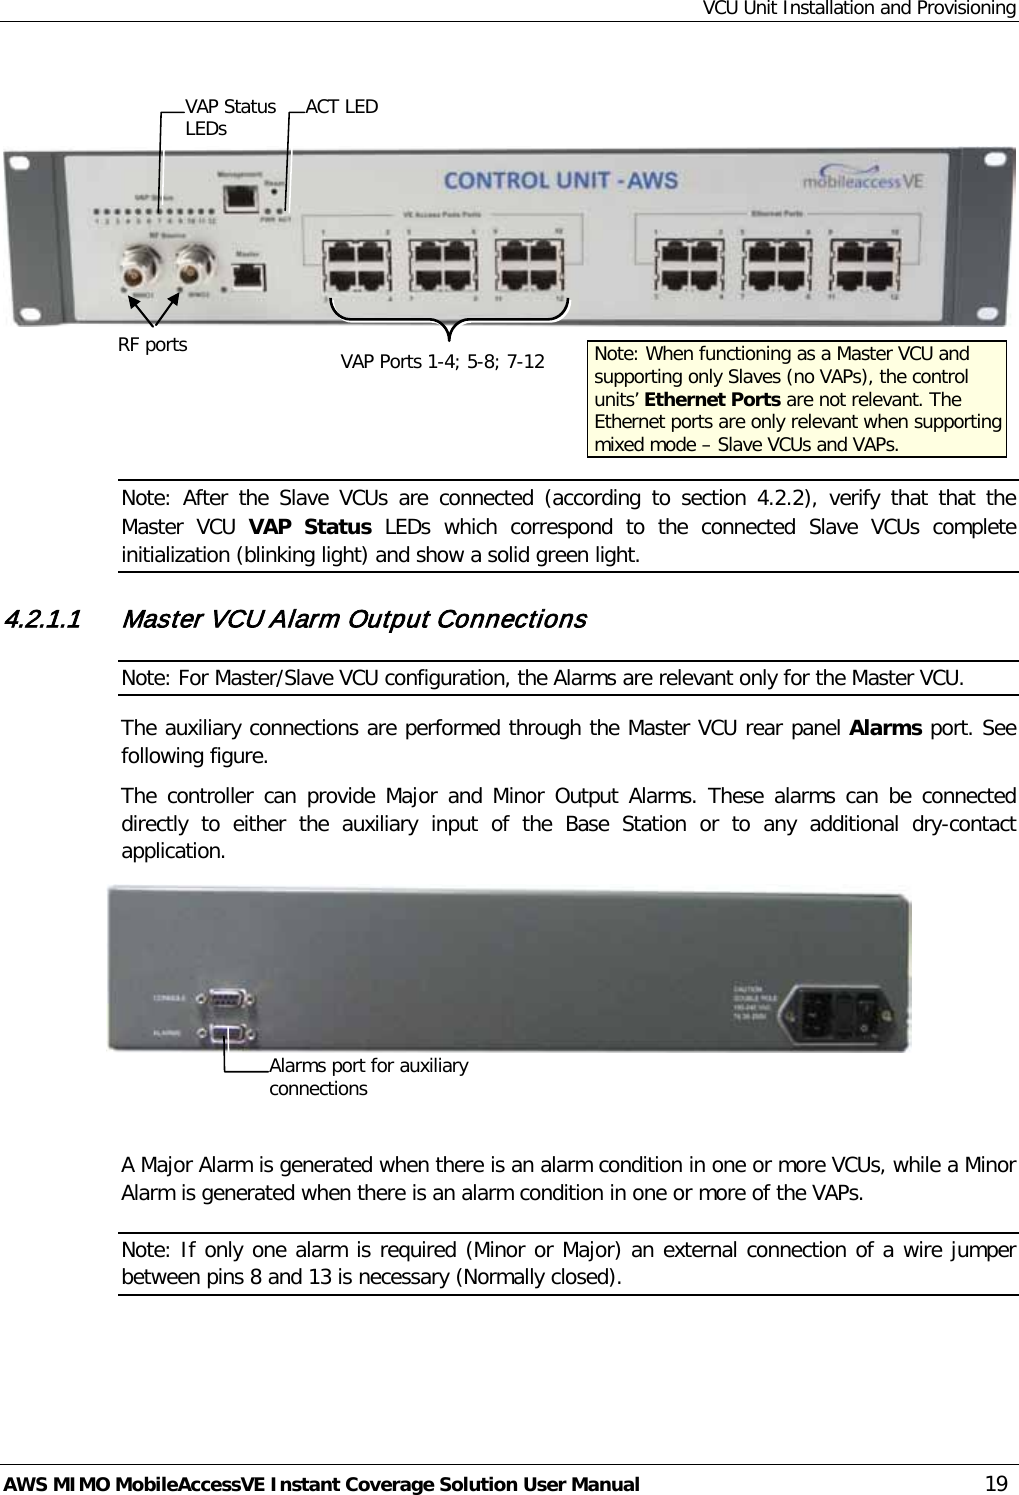 VCU Unit Installation and Provisioning AWS MIMO MobileAccessVE Instant Coverage Solution User Manual  19       Note: After the Slave  VCUs are connected (according to section  4.2.2), verify that that the Master VCU VAP  Status LEDs which correspond to the connected Slave  VCUs complete initialization (blinking light) and show a solid green light. 4.2.1.1 Master VCU Alarm Output Connections Note: For Master/Slave VCU configuration, the Alarms are relevant only for the Master VCU. The auxiliary connections are performed through the Master VCU rear panel Alarms port. See following figure. The controller can provide Major and Minor Output Alarms. These alarms can be connected directly to either  the auxiliary input of the Base Station or to any additional dry-contact application.    A Major Alarm is generated when there is an alarm condition in one or more VCUs, while a Minor Alarm is generated when there is an alarm condition in one or more of the VAPs. Note: If only one alarm is required (Minor or Major) an external connection of a wire jumper between pins 8 and 13 is necessary (Normally closed). RF ports  Note: When functioning as a Master VCU and supporting only Slaves (no VAPs), the control units’ Ethernet Ports are not relevant. The Ethernet ports are only relevant when supporting mixed mode – Slave VCUs and VAPs. VAP Ports 1-4; 5-8; 7-12 ACT LED  VAP Status LEDs Alarms port for auxiliary connections  